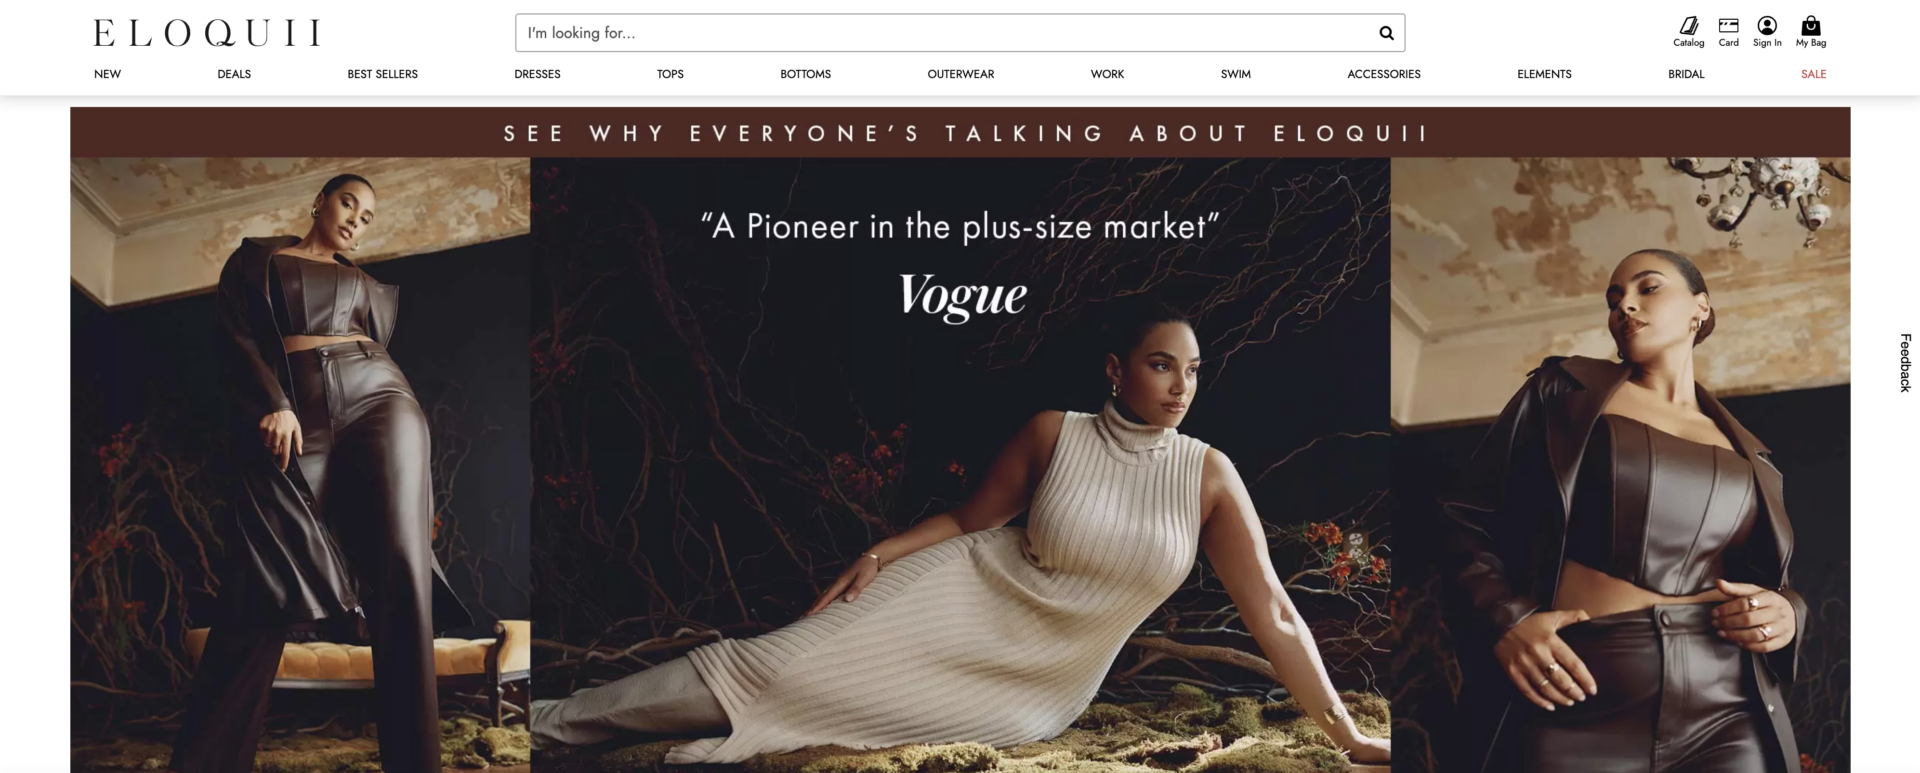 Plus-Size Brands, Fashion blogger Erin Busbee of BusbeeStyle.com sharing the best brands for curvy women including Eloquii